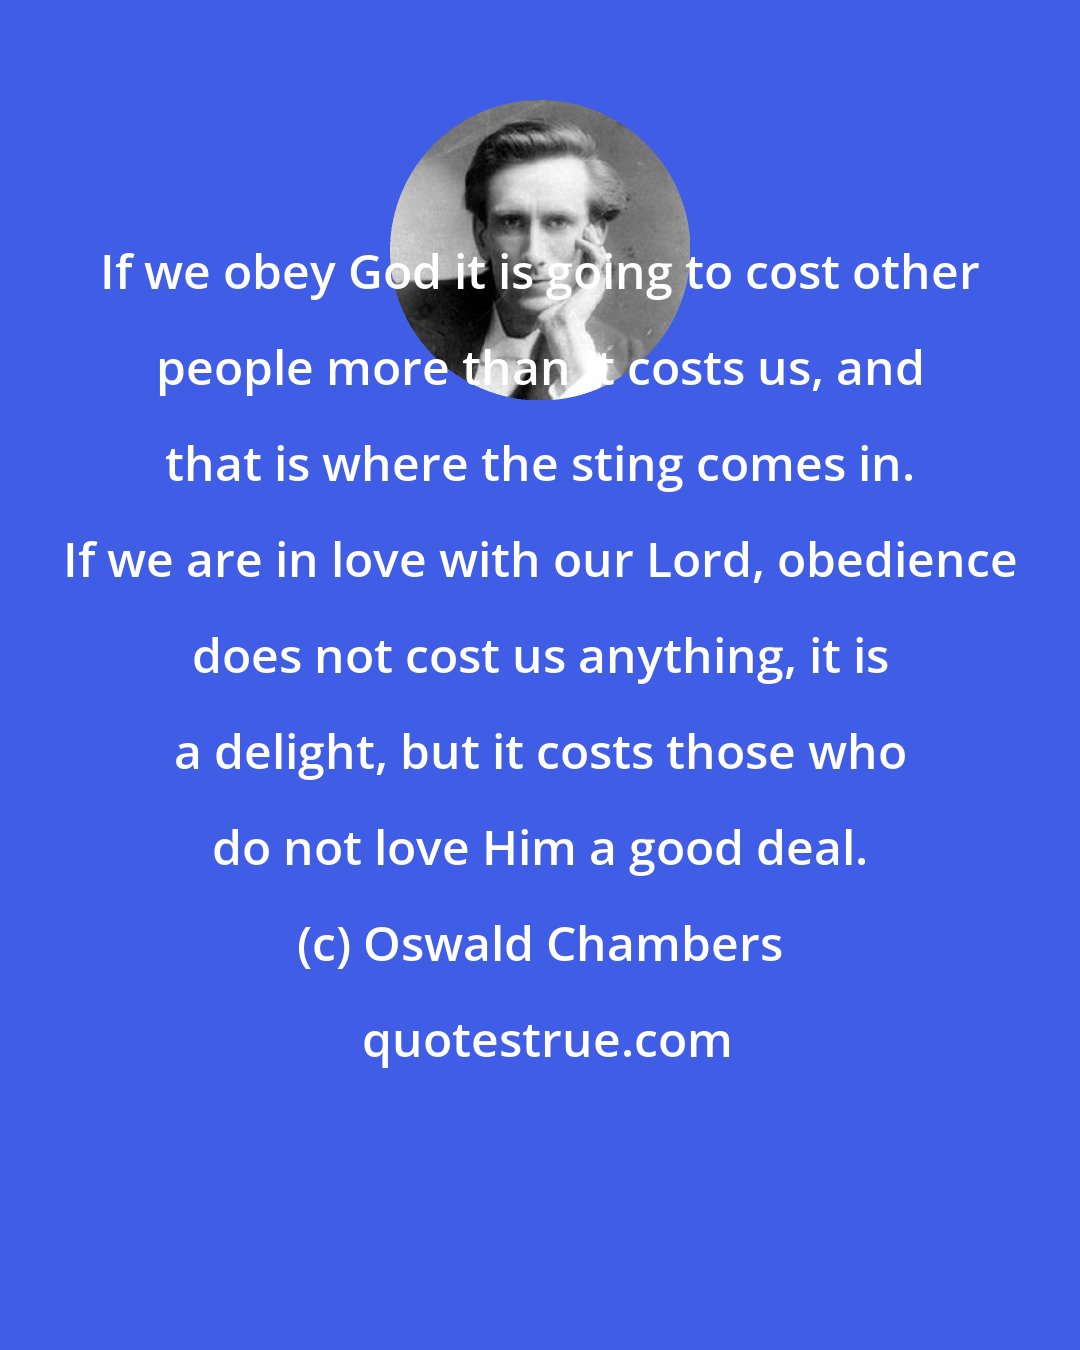 Oswald Chambers: If we obey God it is going to cost other people more than it costs us, and that is where the sting comes in. If we are in love with our Lord, obedience does not cost us anything, it is a delight, but it costs those who do not love Him a good deal.